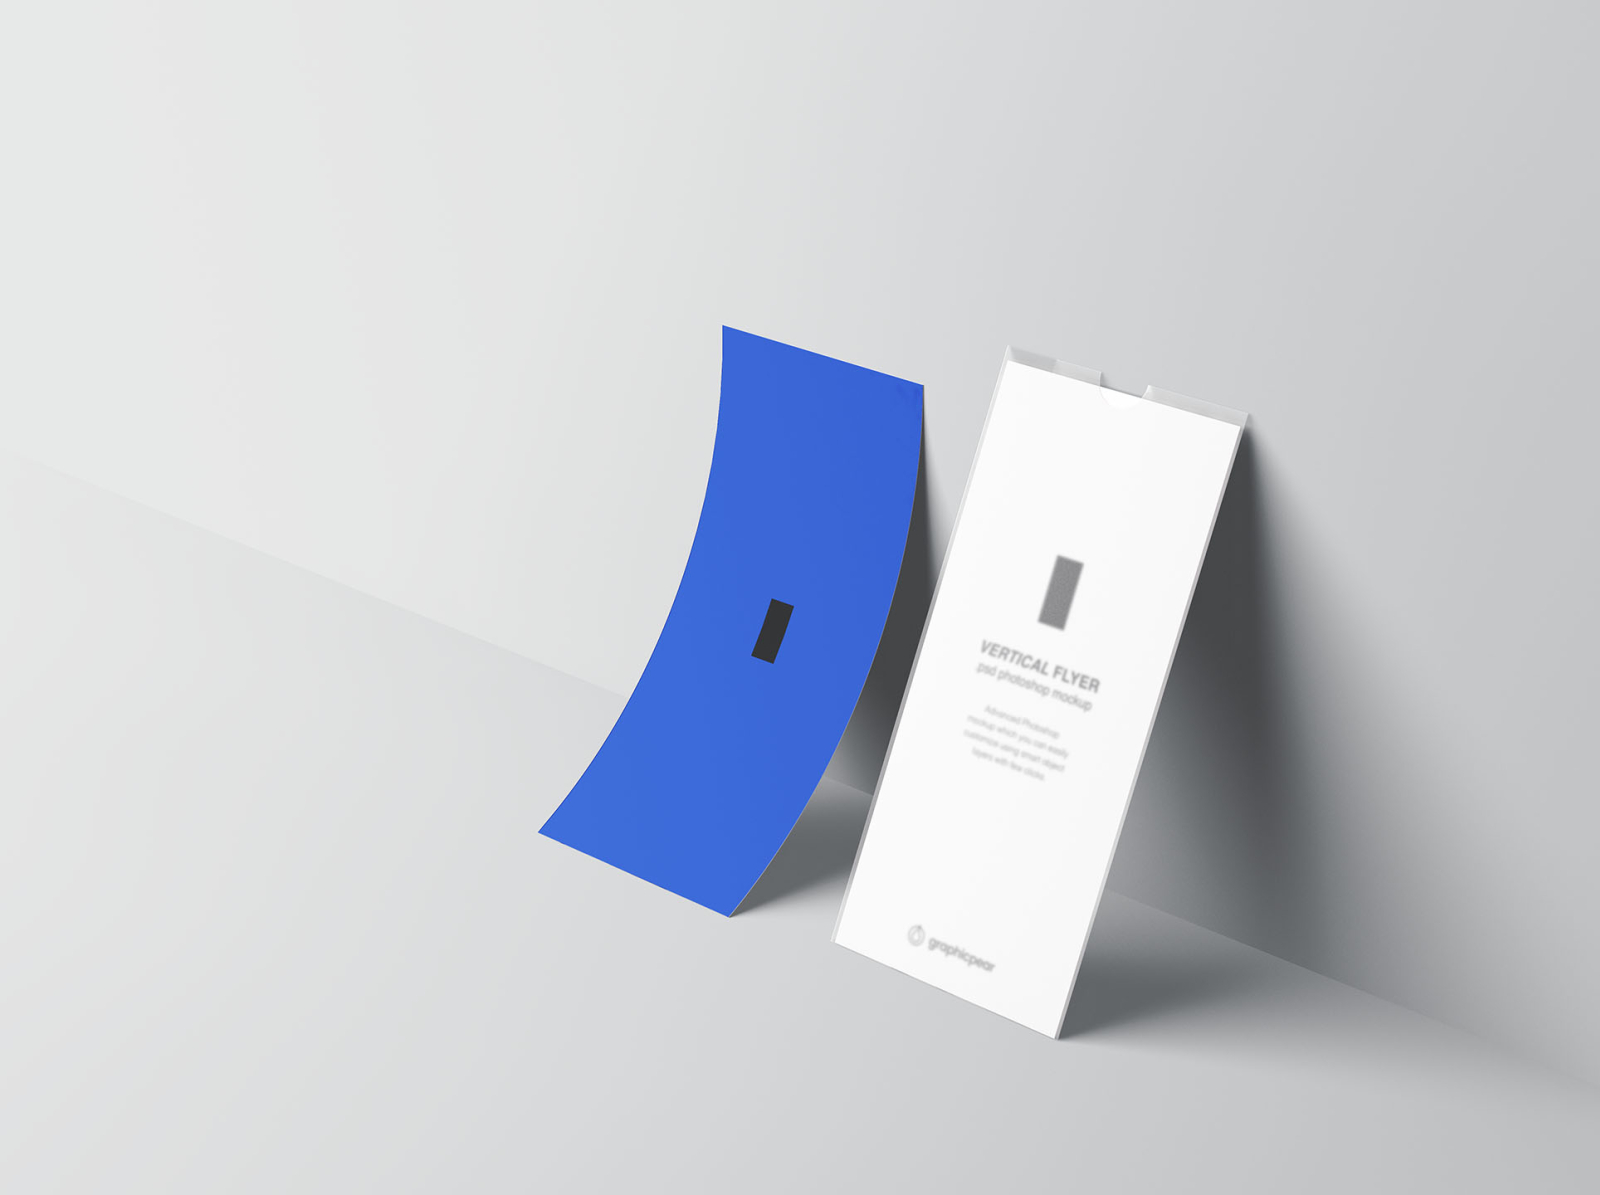 Download Vertical Leaflet Mockup by Graphic Pear on Dribbble